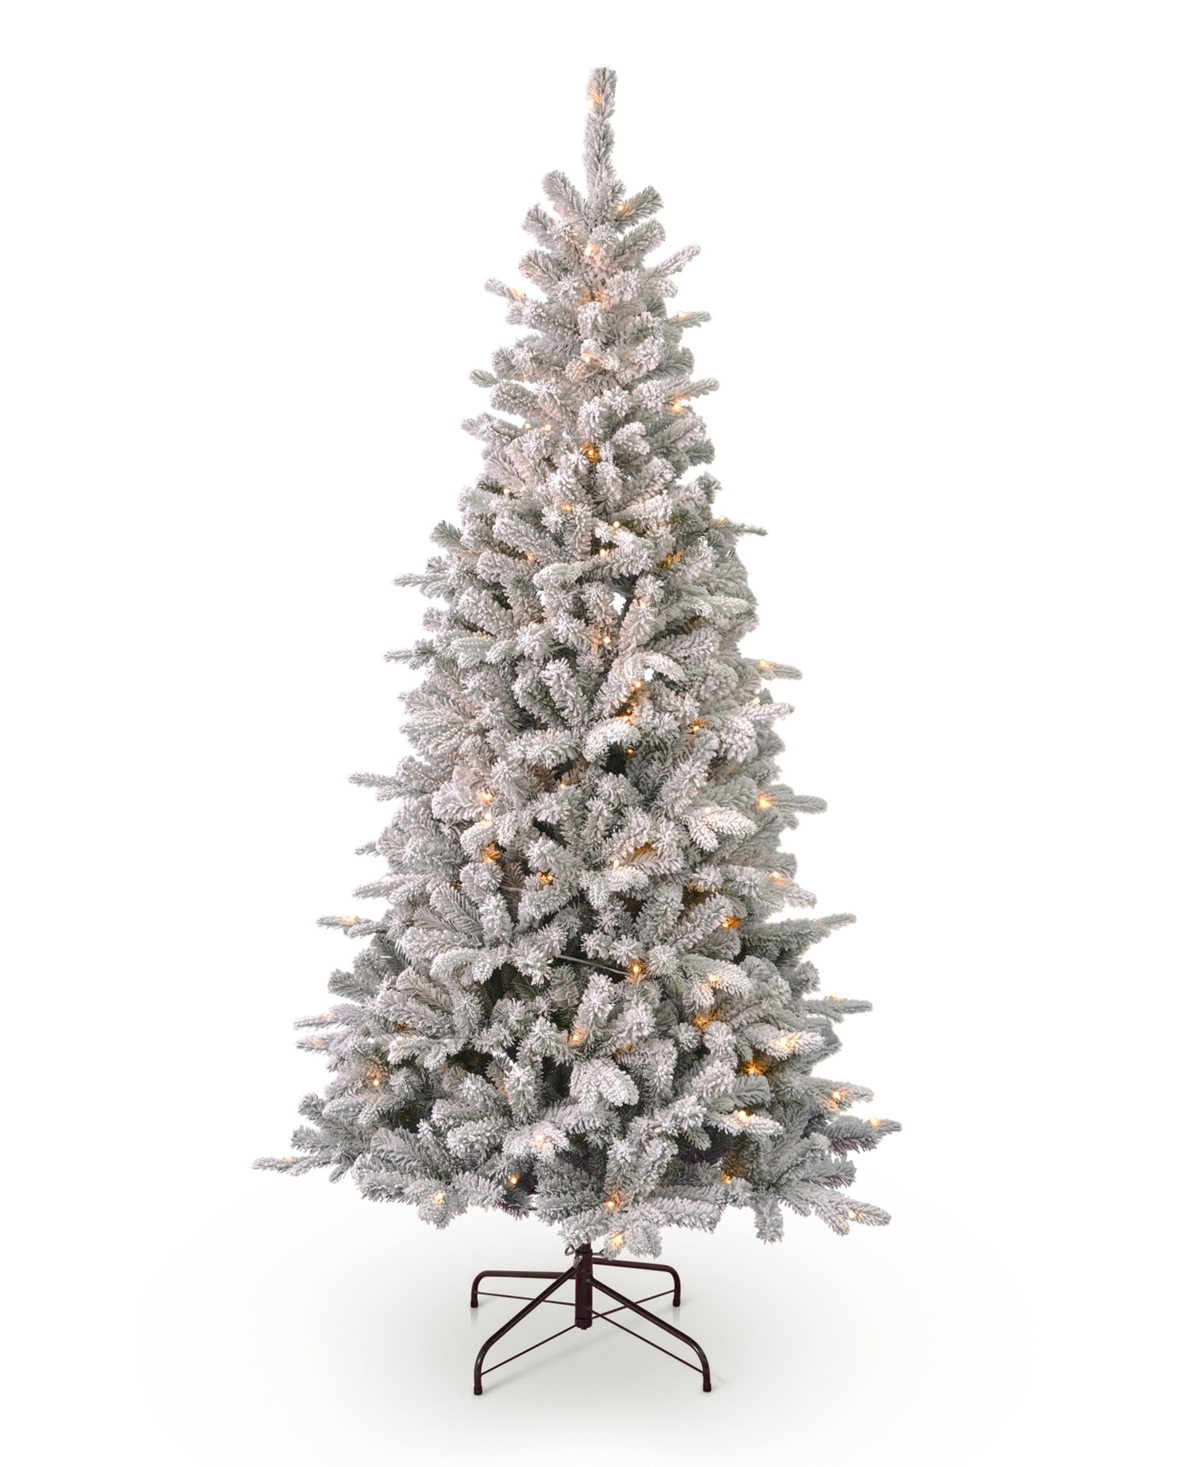 Estes Pine Flocked Pre-Lit 7' Pe, Pvc Tree with Metal Stand, 1231 Tips, 200 Led Lights and Remote - White